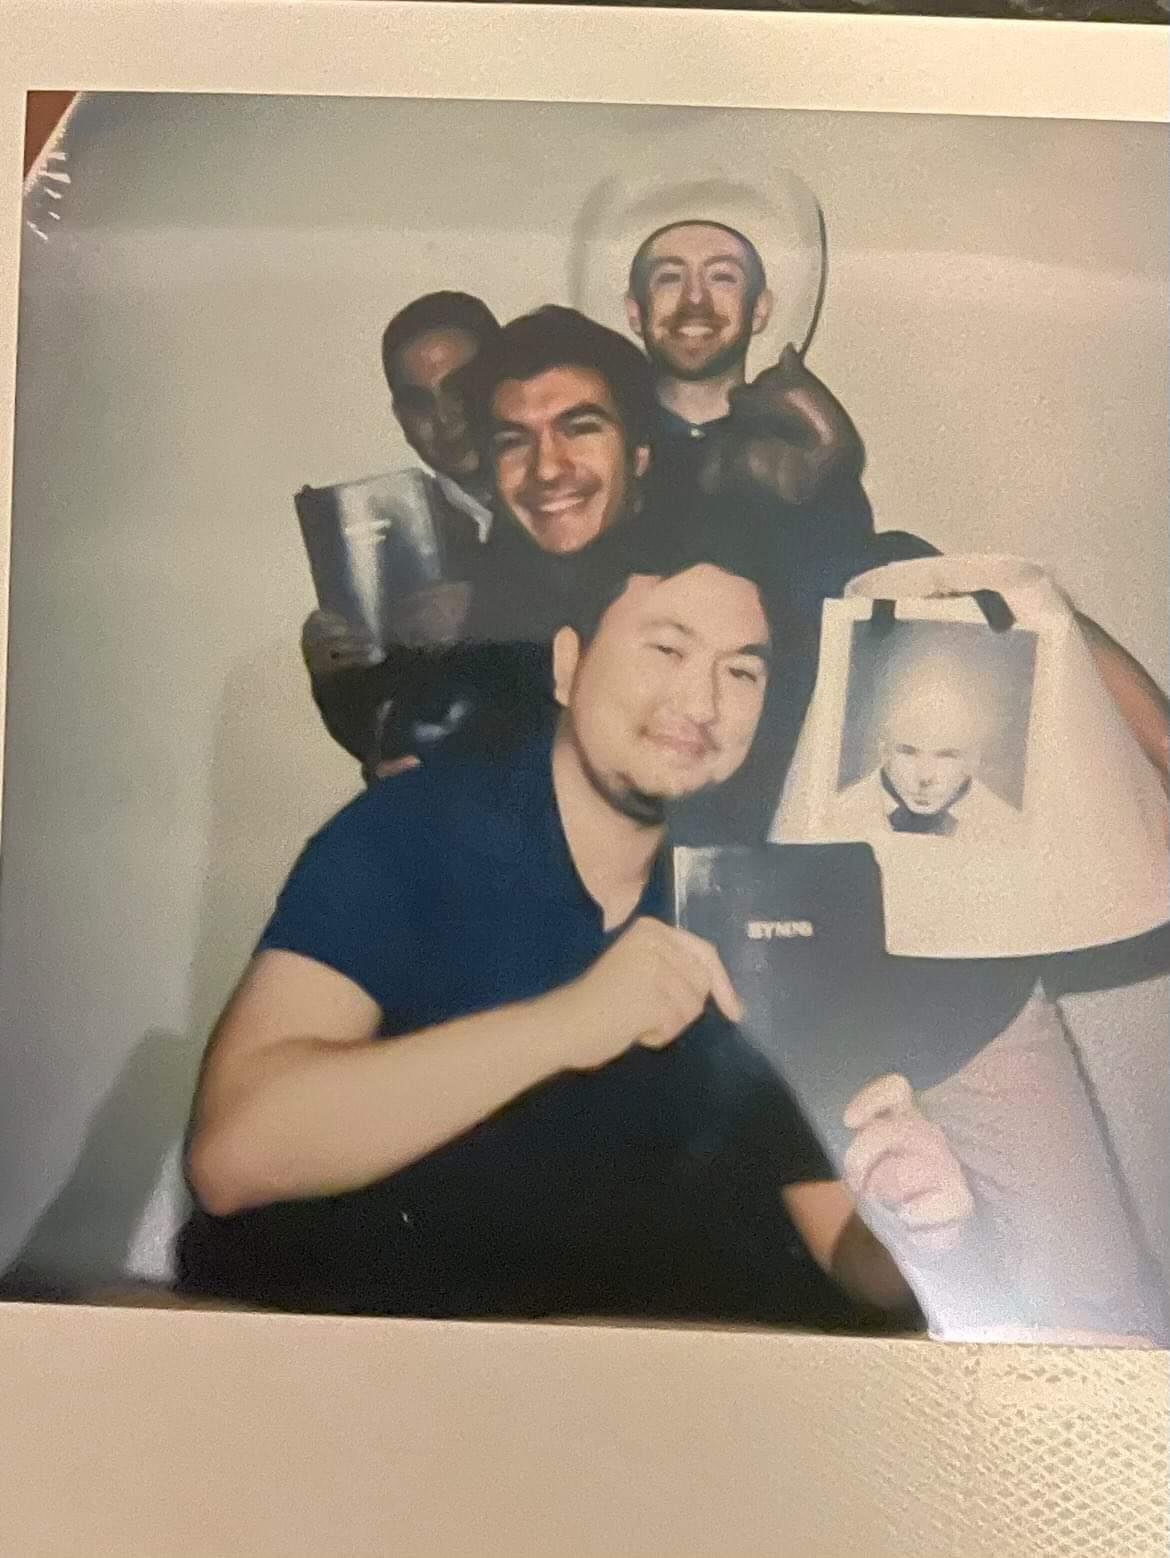 A blurry polaroid of UCDC Fellow Andrew Neciuk and three friends holding books and other items 